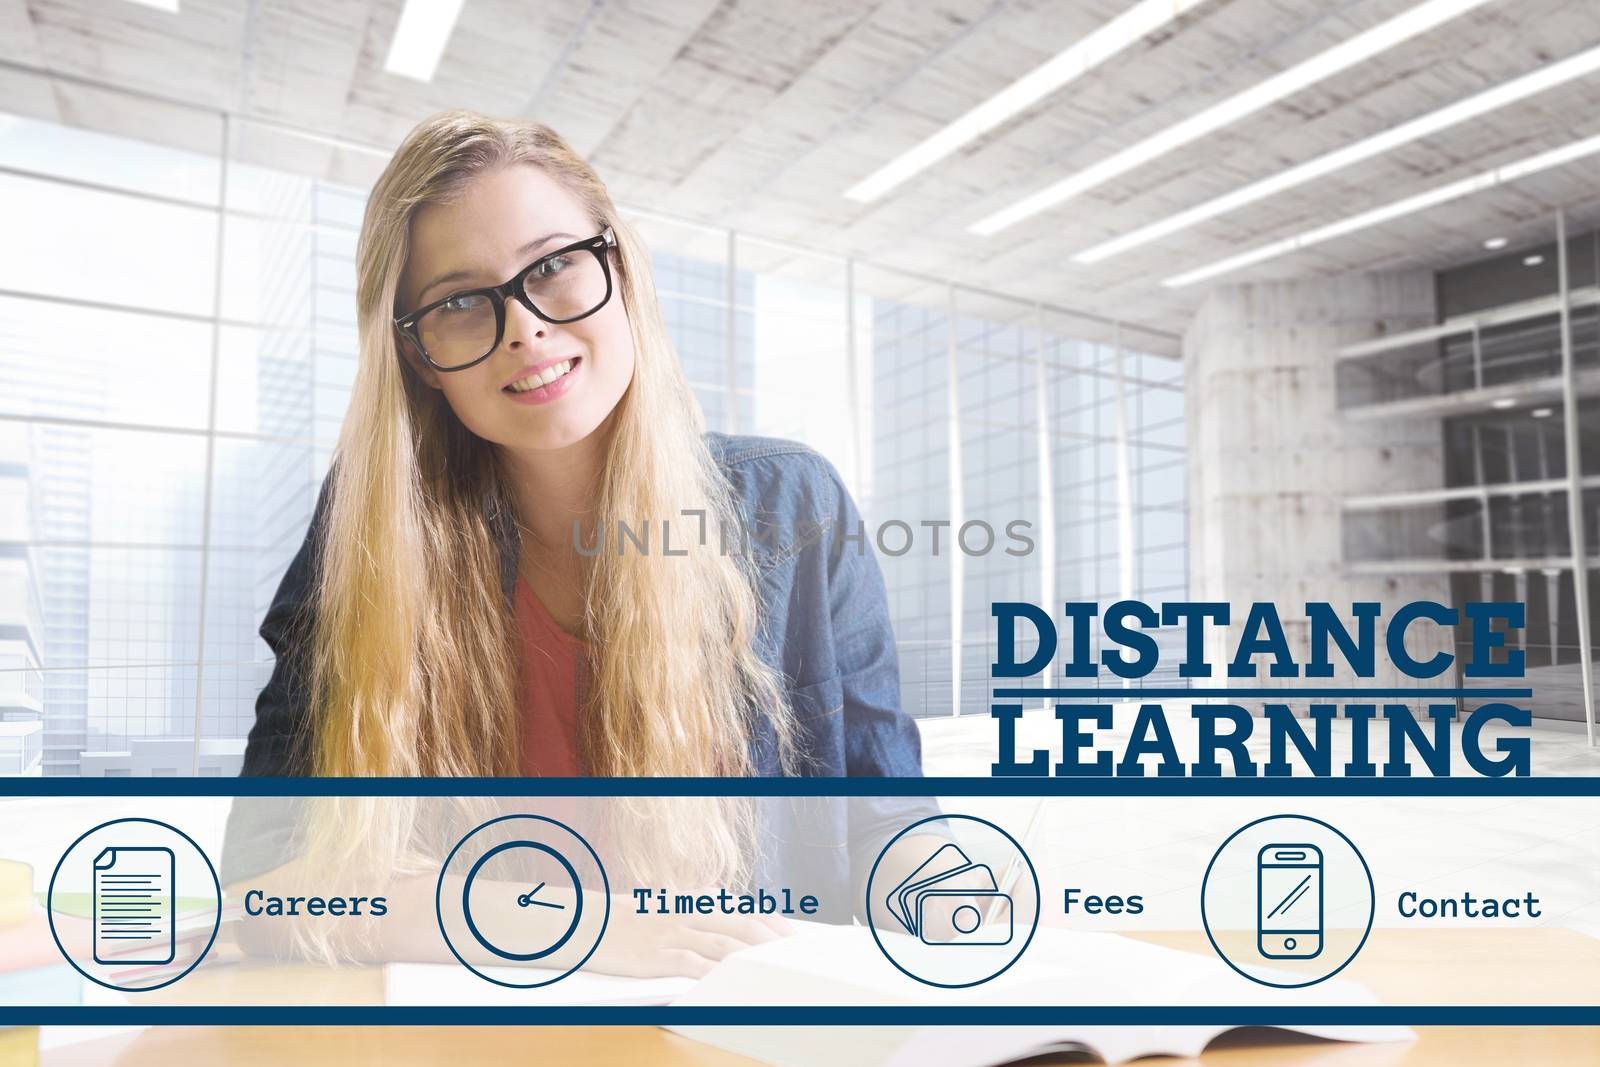 Digital composite of Education and distance learning text and icons and woman sitting